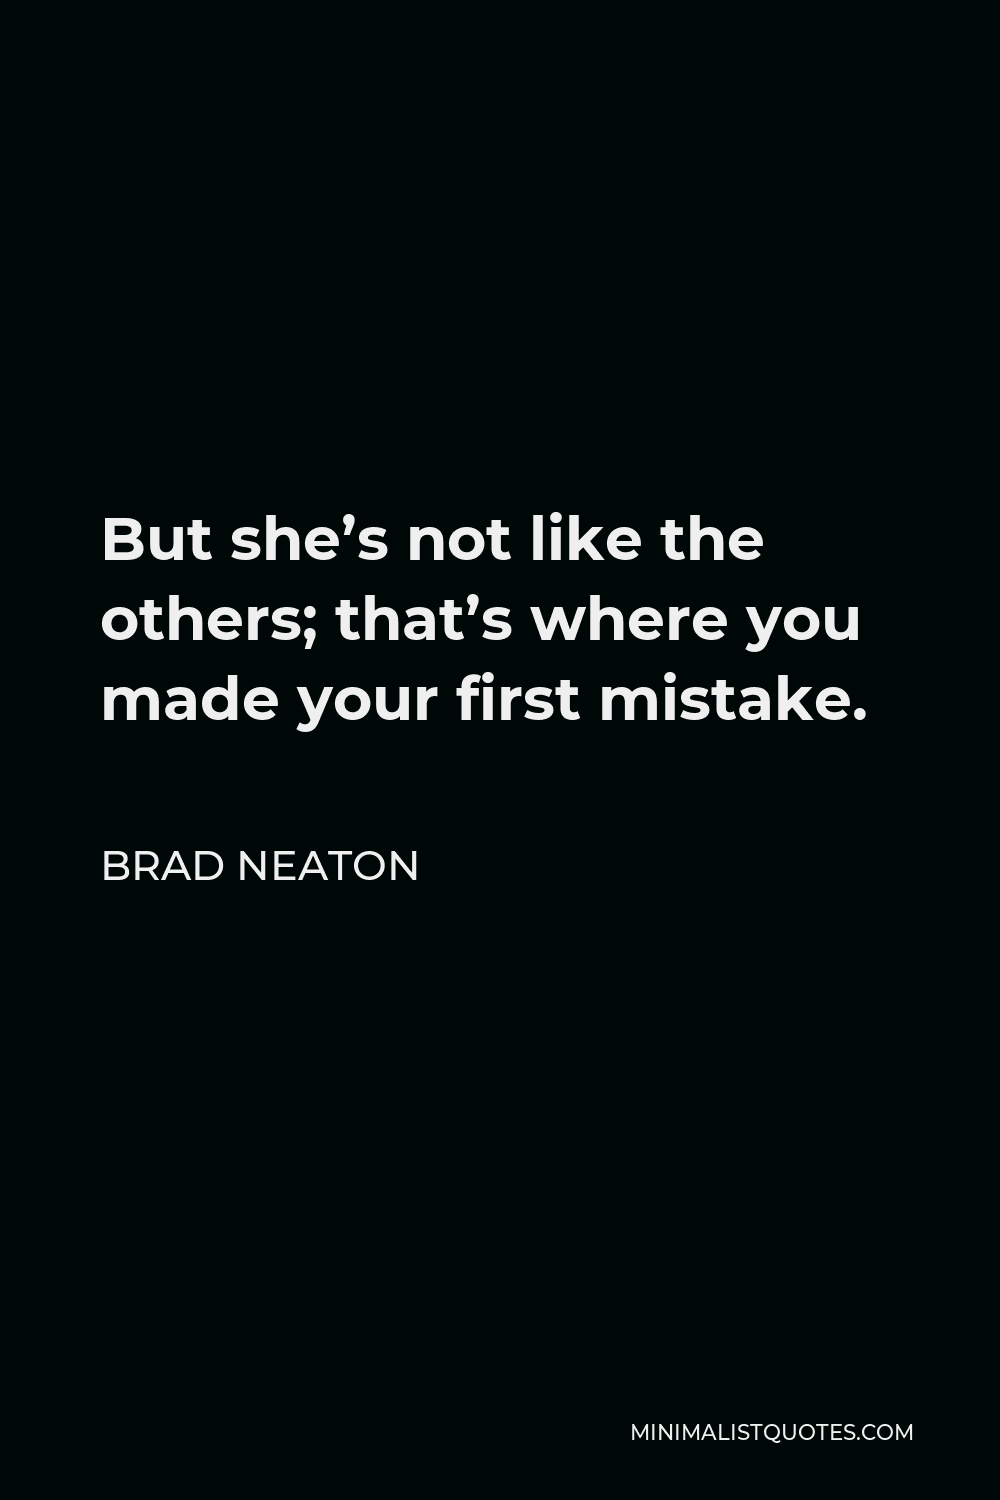 Brad Neaton Quote - But she’s not like the others; that’s where you made your first mistake.